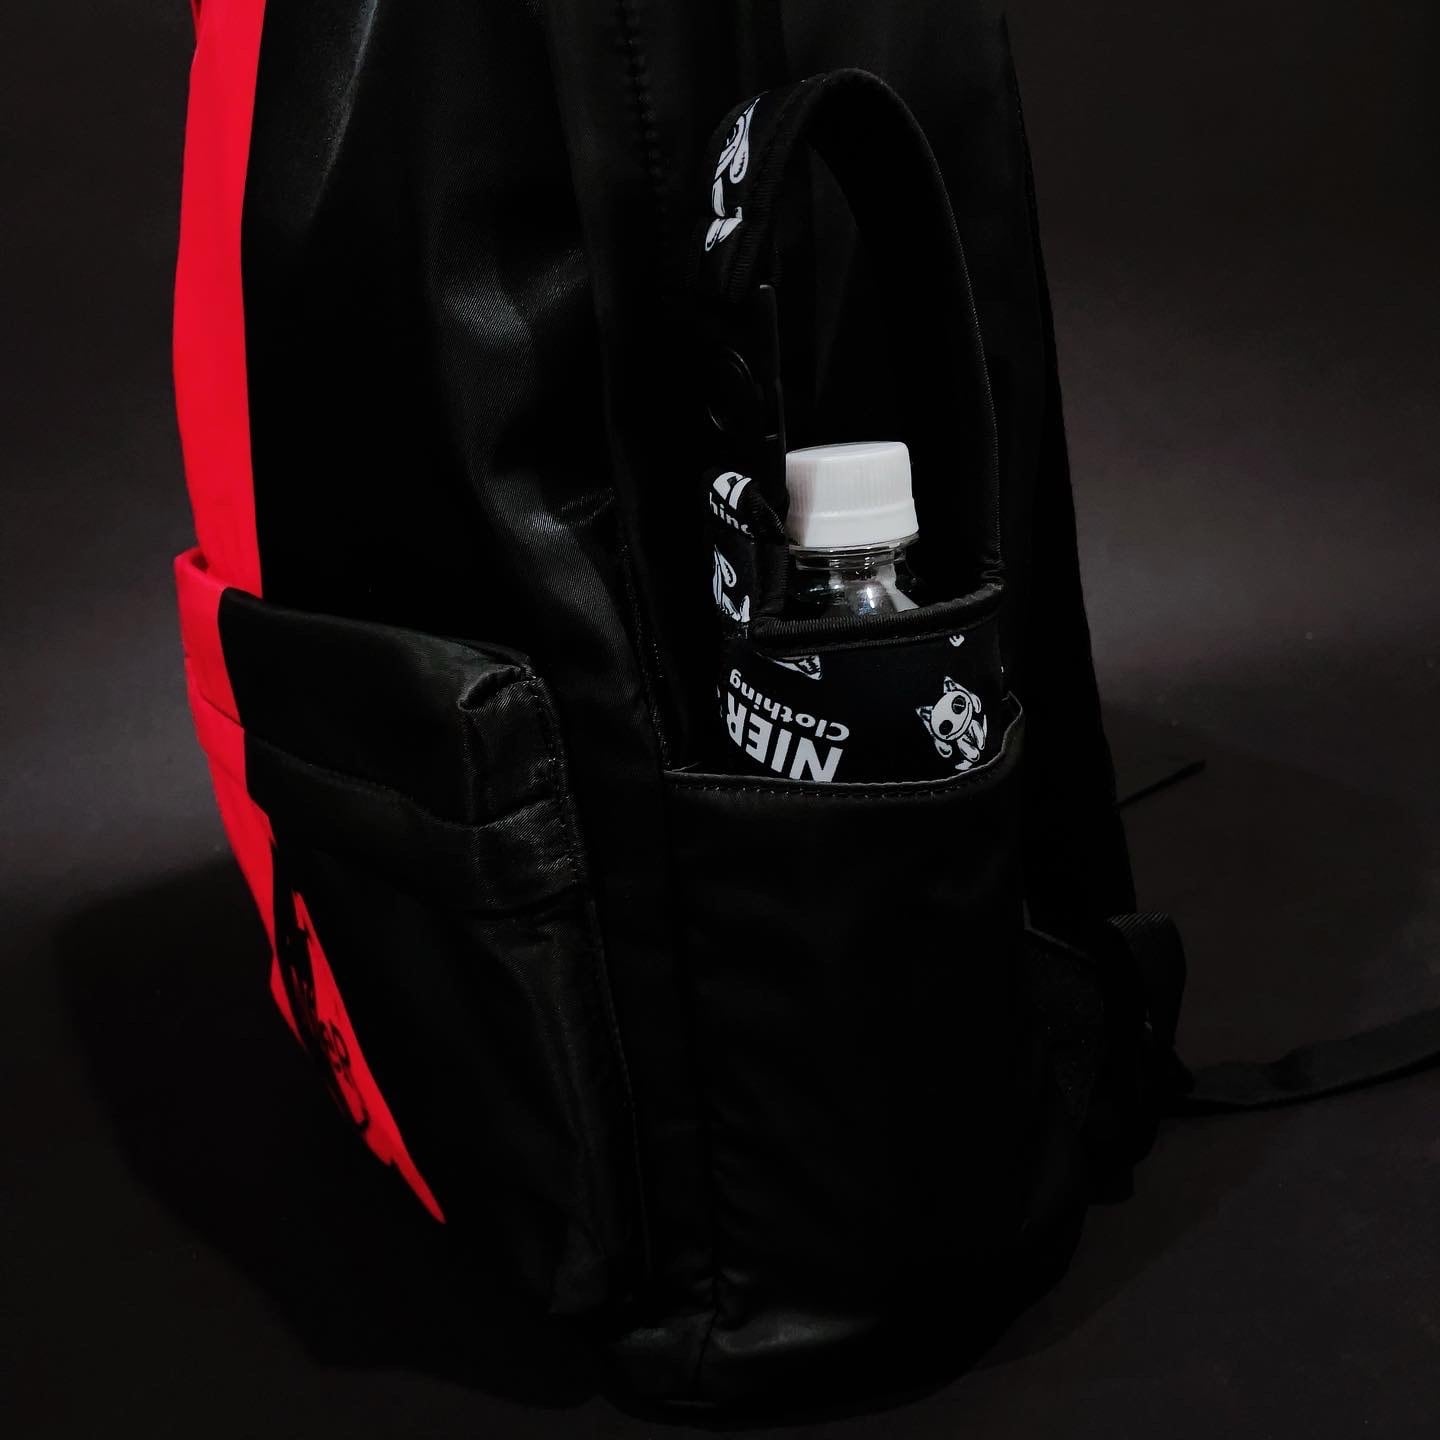 NieR TWO-TONE 大容量BACKPACK【RED×BLACK】 | NIER CLOTHING powered by BASE